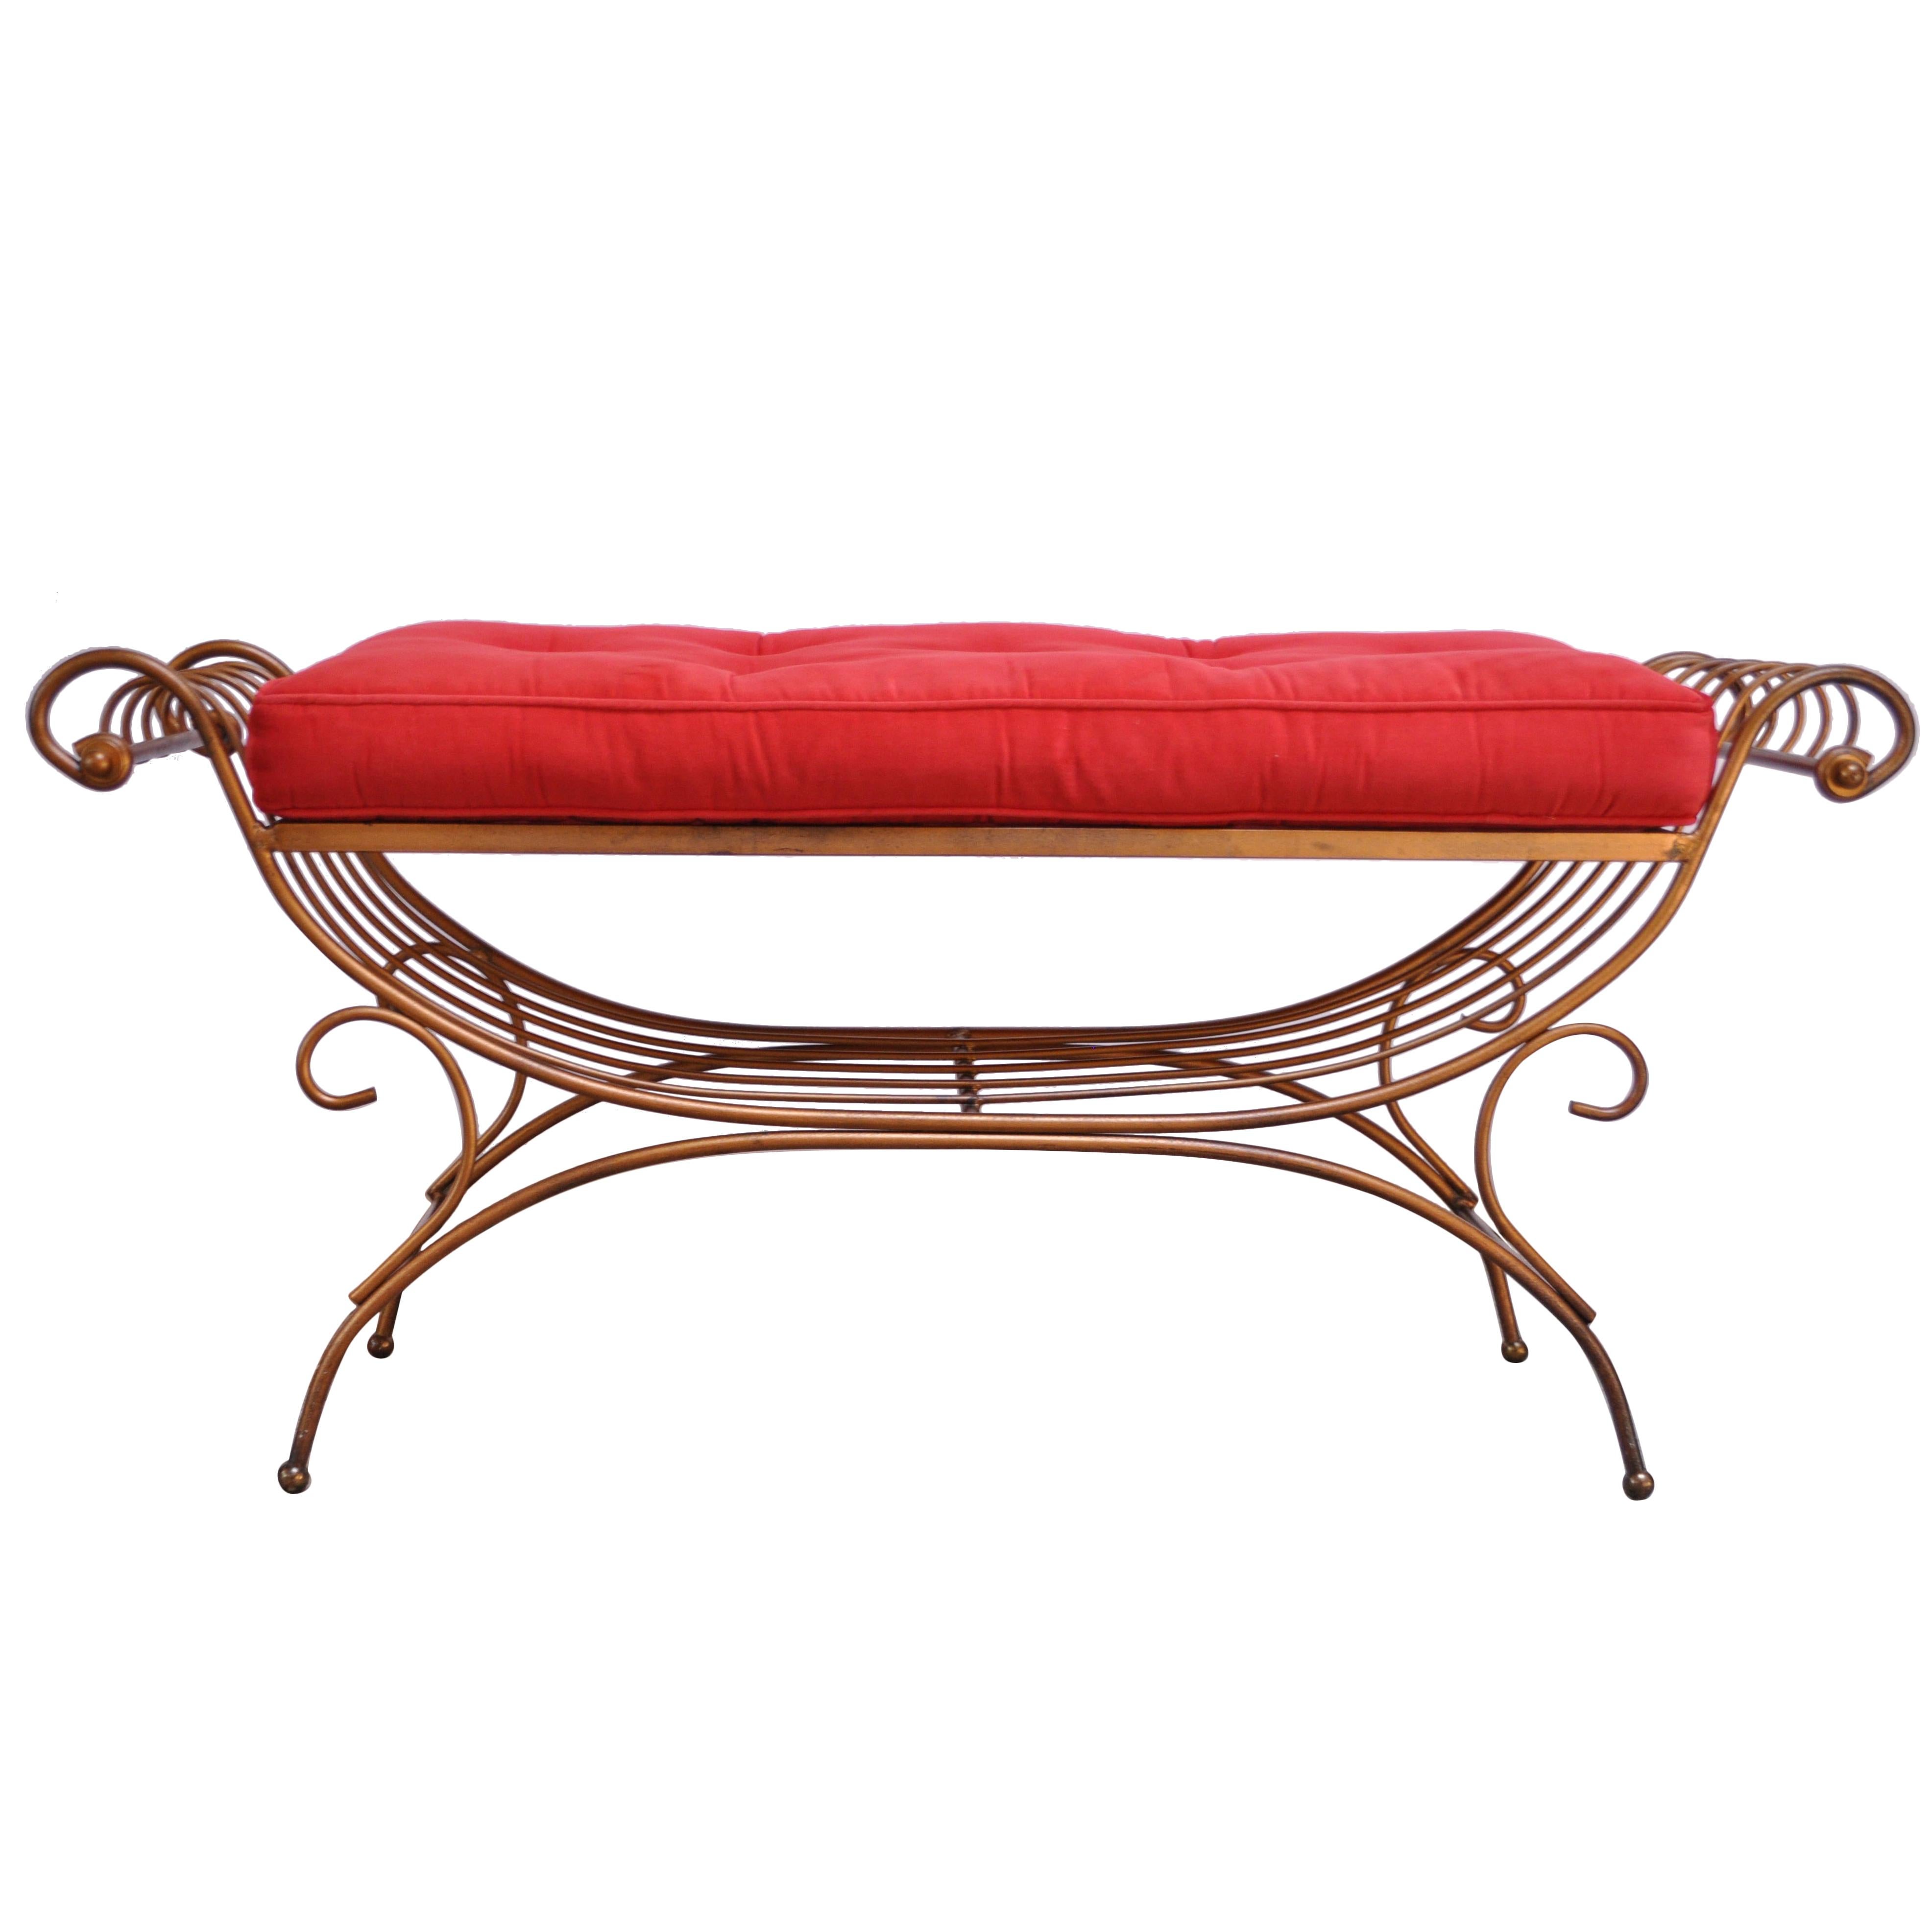 Italian Patinated Brass Bench with Cushion